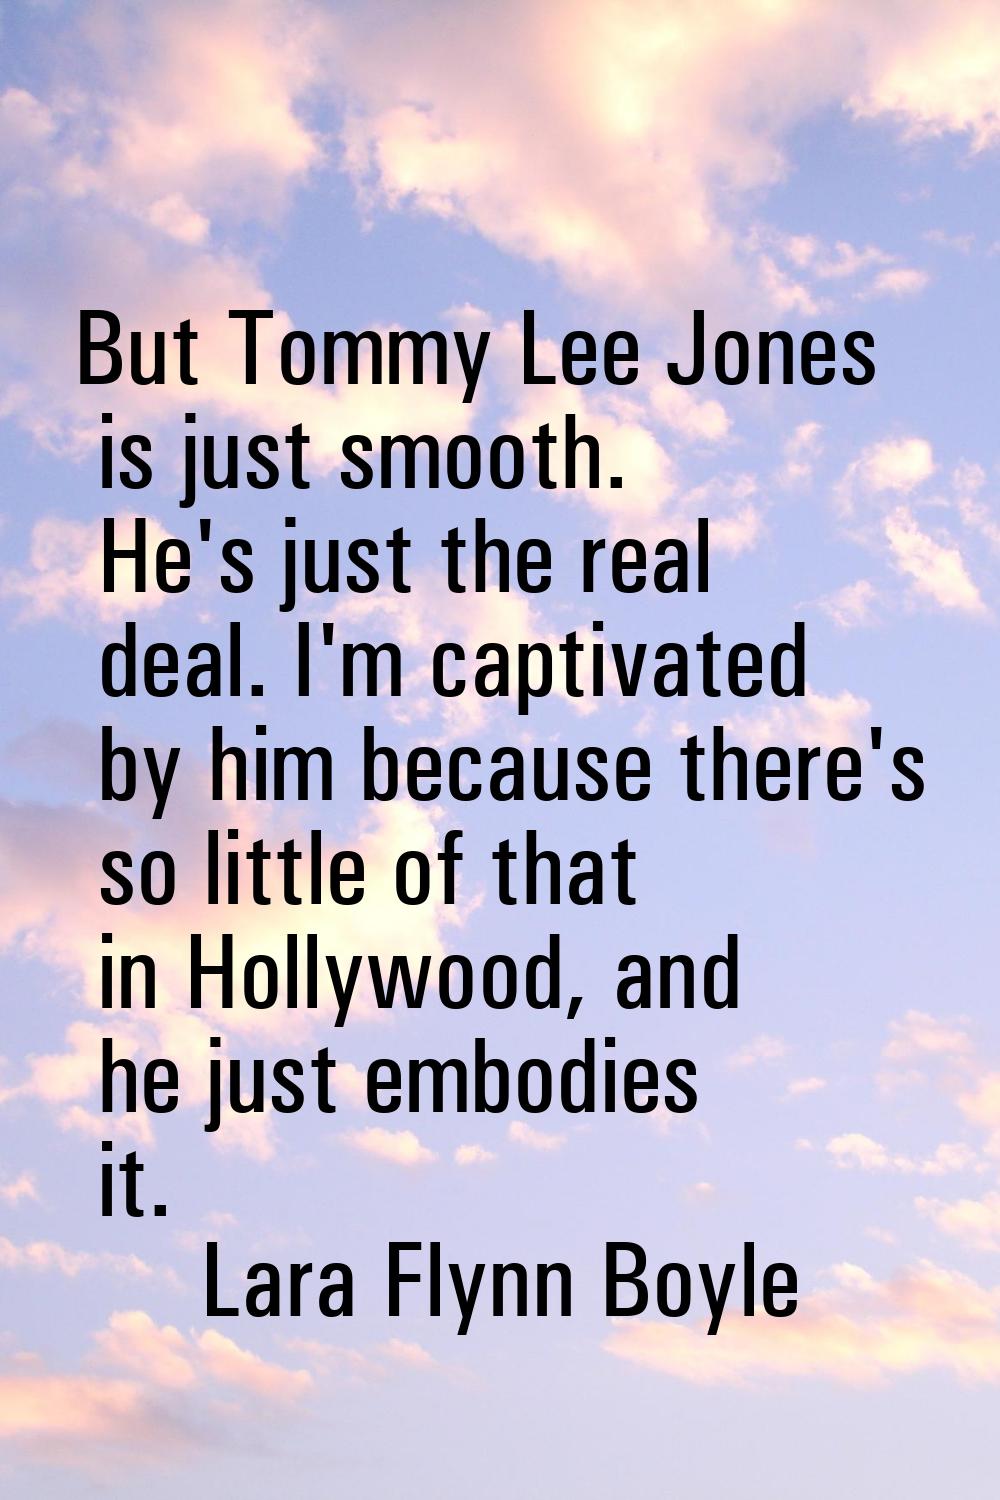 But Tommy Lee Jones is just smooth. He's just the real deal. I'm captivated by him because there's 